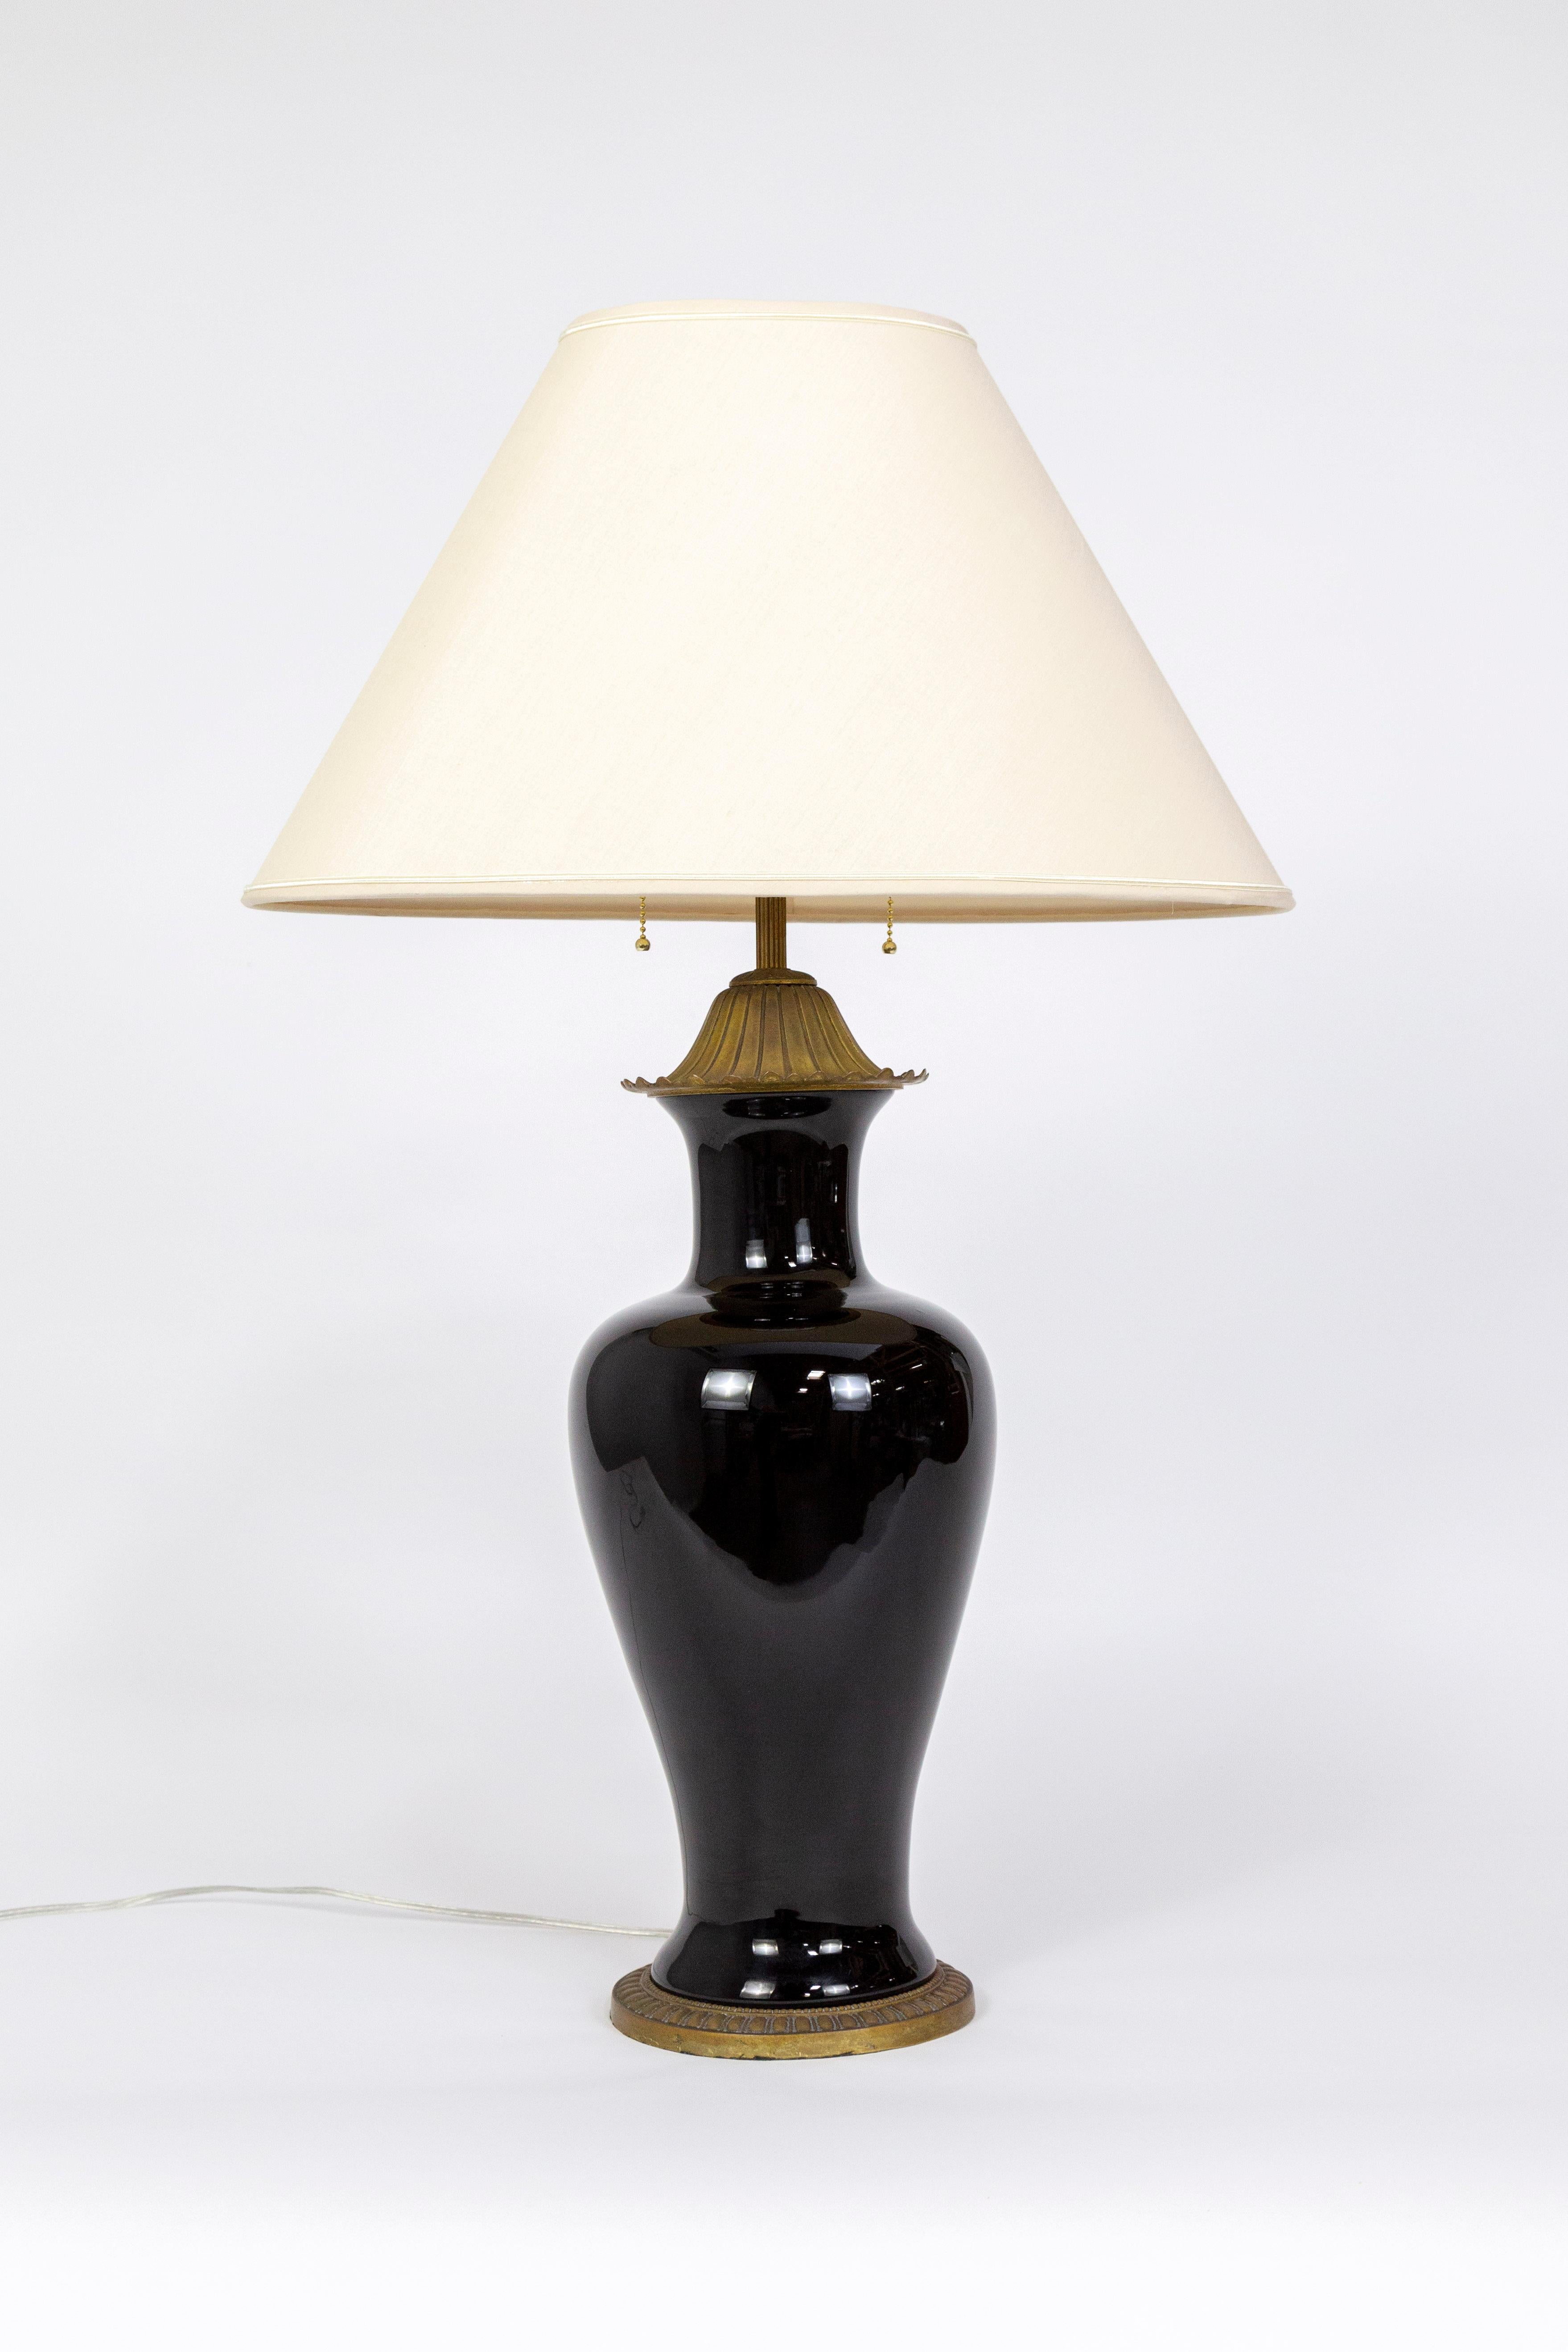 A classical, amphora jar shaped, porcelain lamp glazed in slick black; with a beautifully aged and finely cast brass base, bellflower cap, and ribbed stem. It was made in the 1950s by Marbro Lamp Co. of Los Angeles. Newly wired with two swiveling